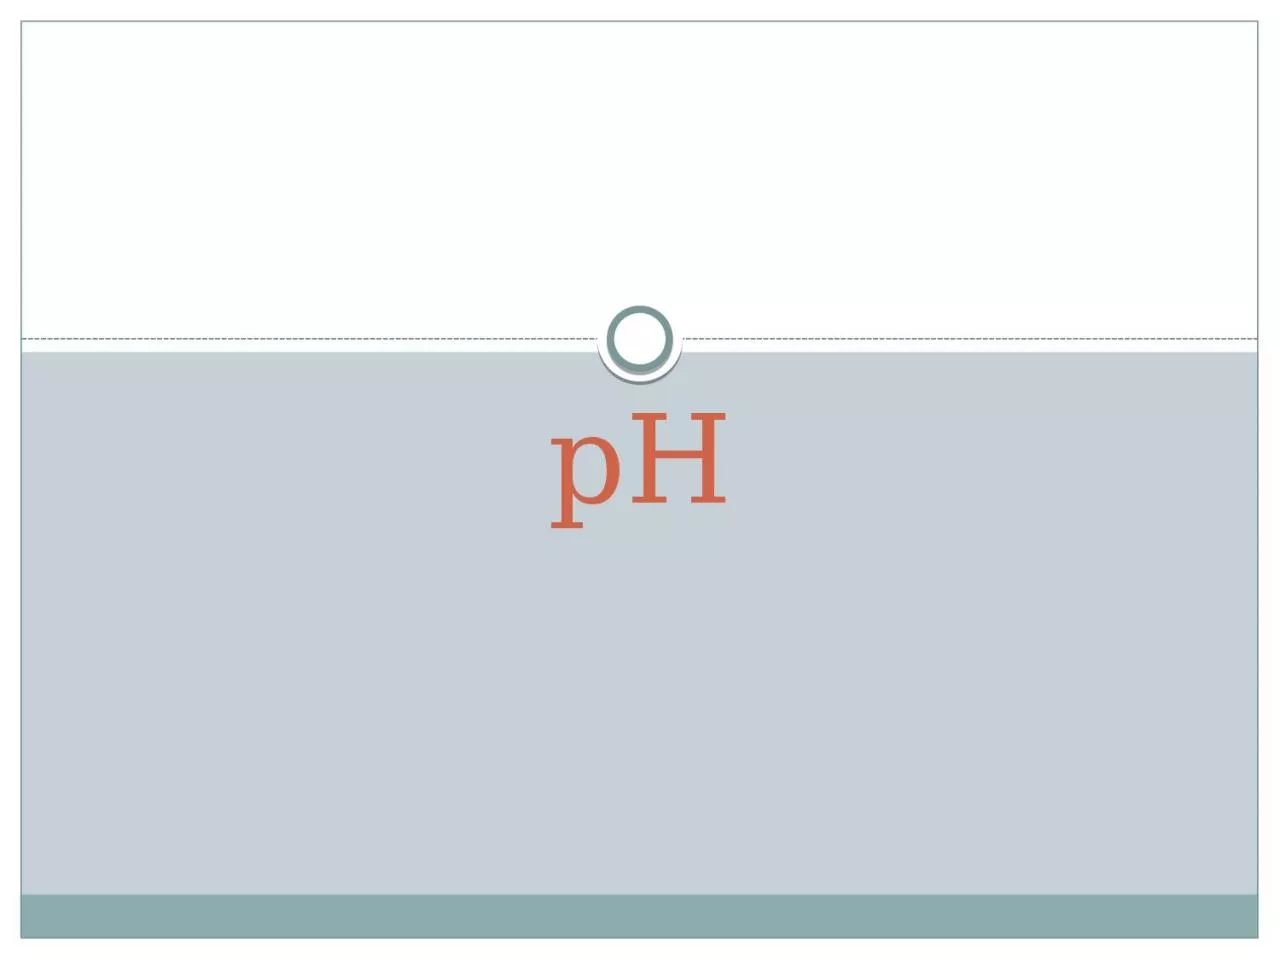 pH Concentration   [ ] – bracket notation is used to show concentration